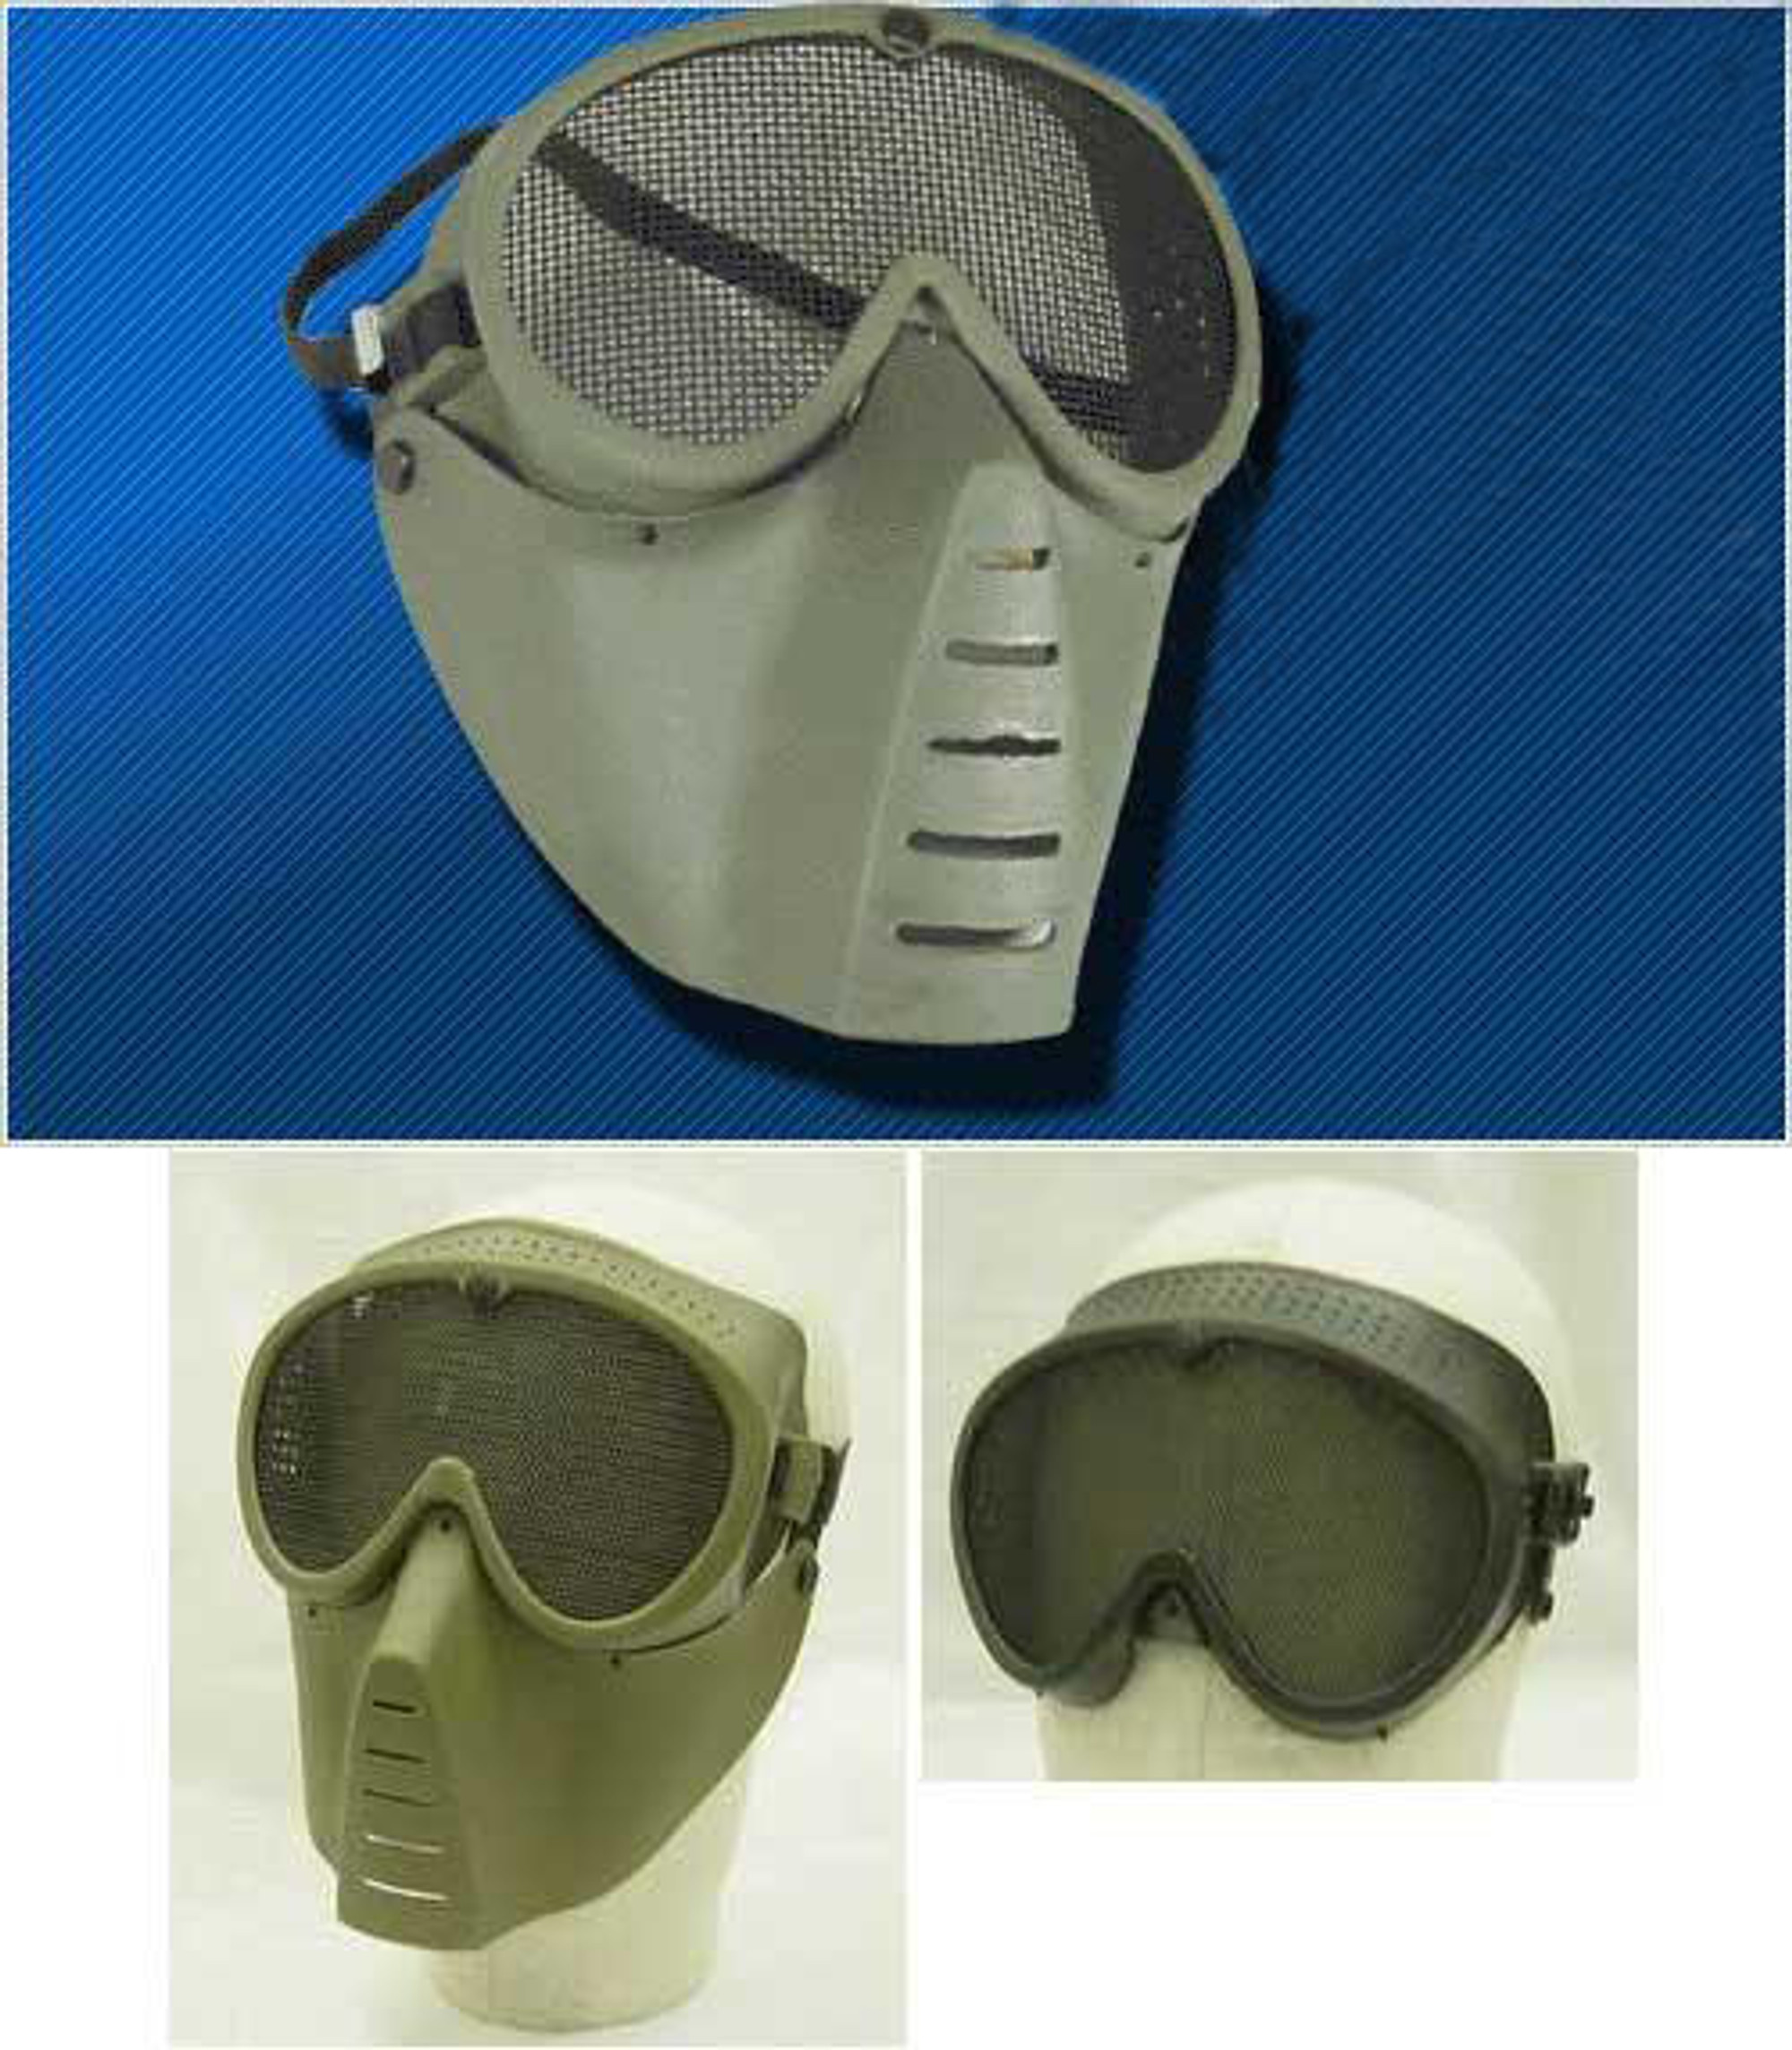 SanSei Type Tactical Low Profile Airsoft Mesh Mask - OD Green